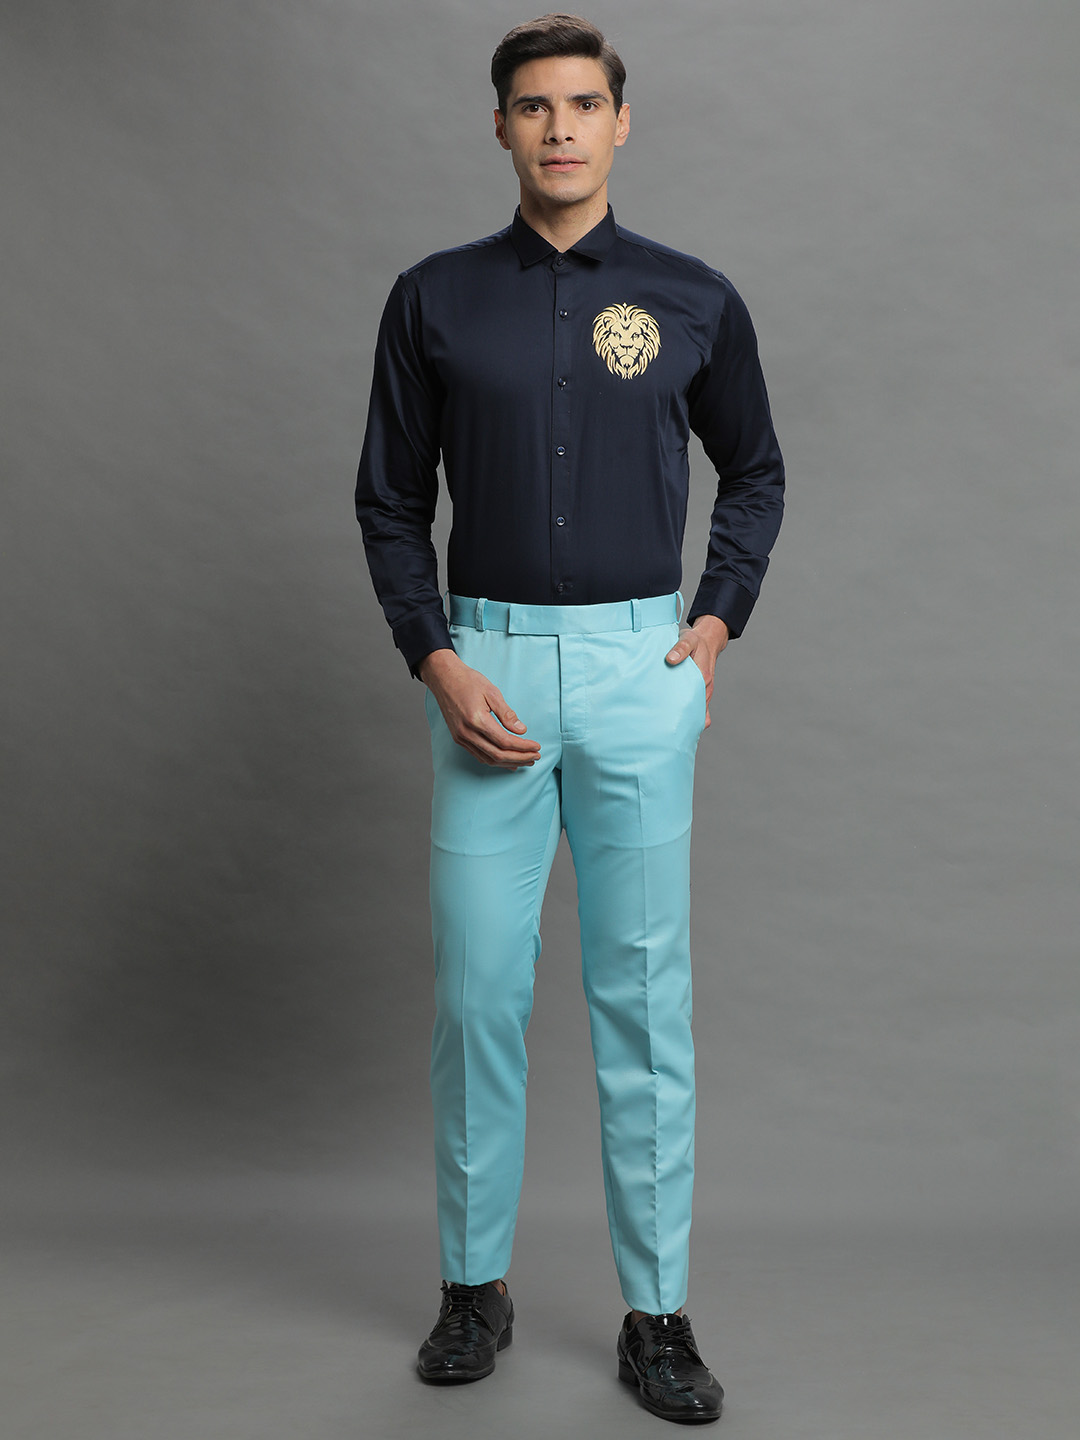 Lion Embroidered Blue Shirt